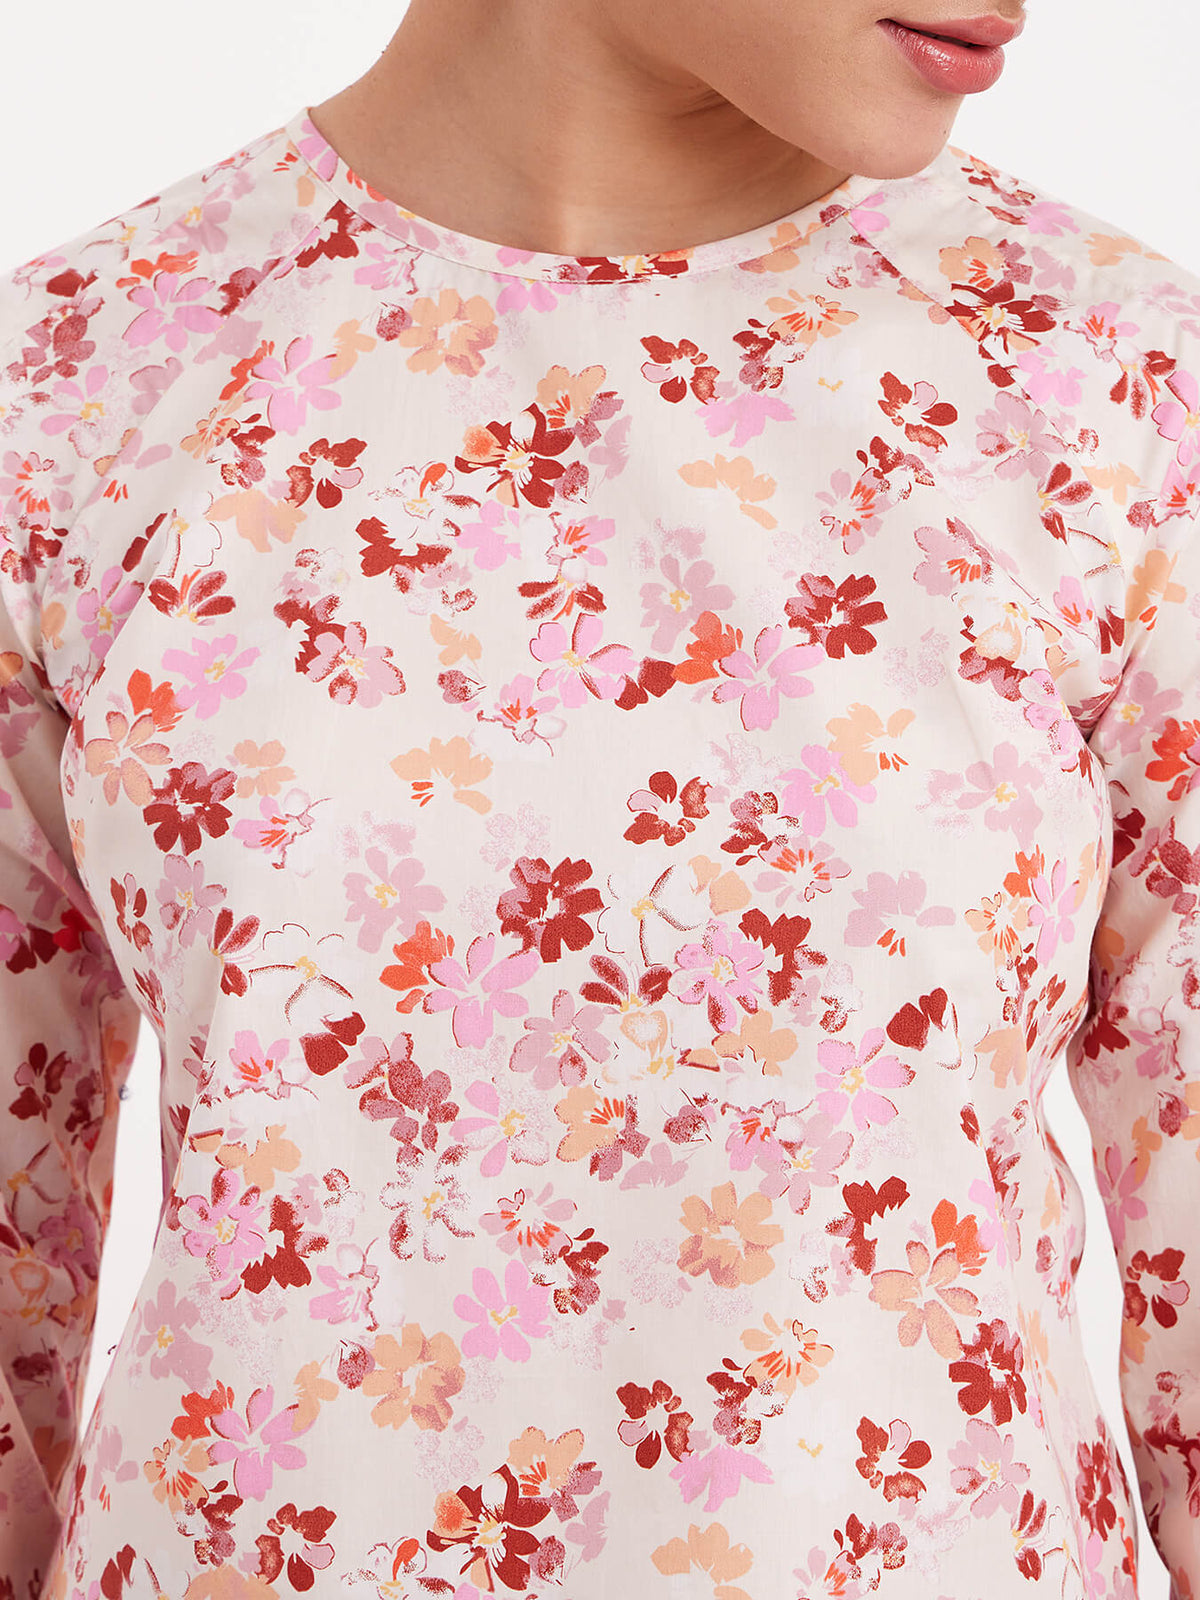 Cotton Floral Print Round Neck Top - White And Maroon